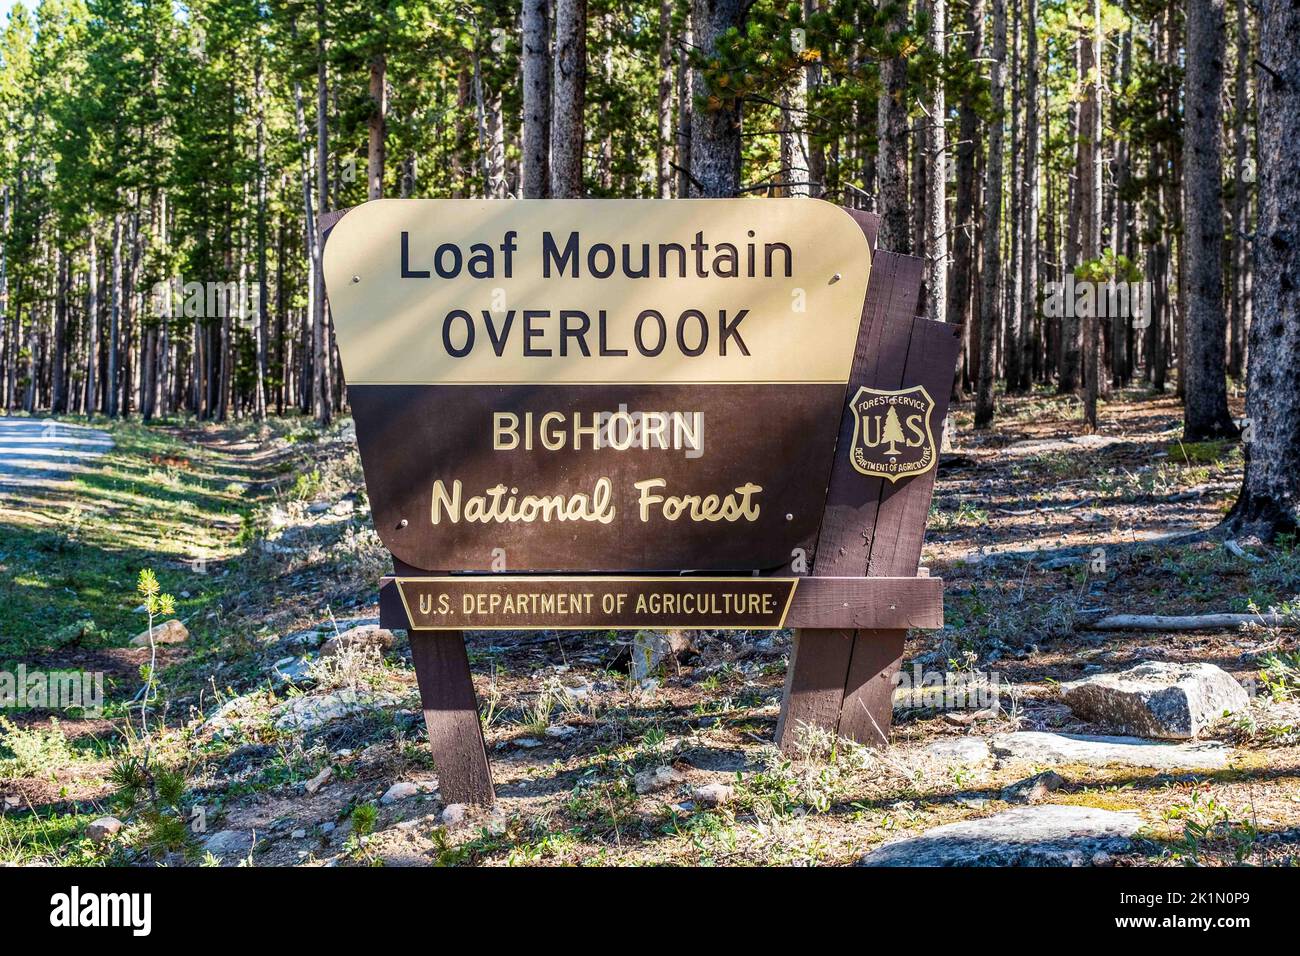 US Forest Service sign for the Loaf Mountain Overlook in the Bighorn National Forest, Wyoming. US Department of Agriculture. Stock Photo